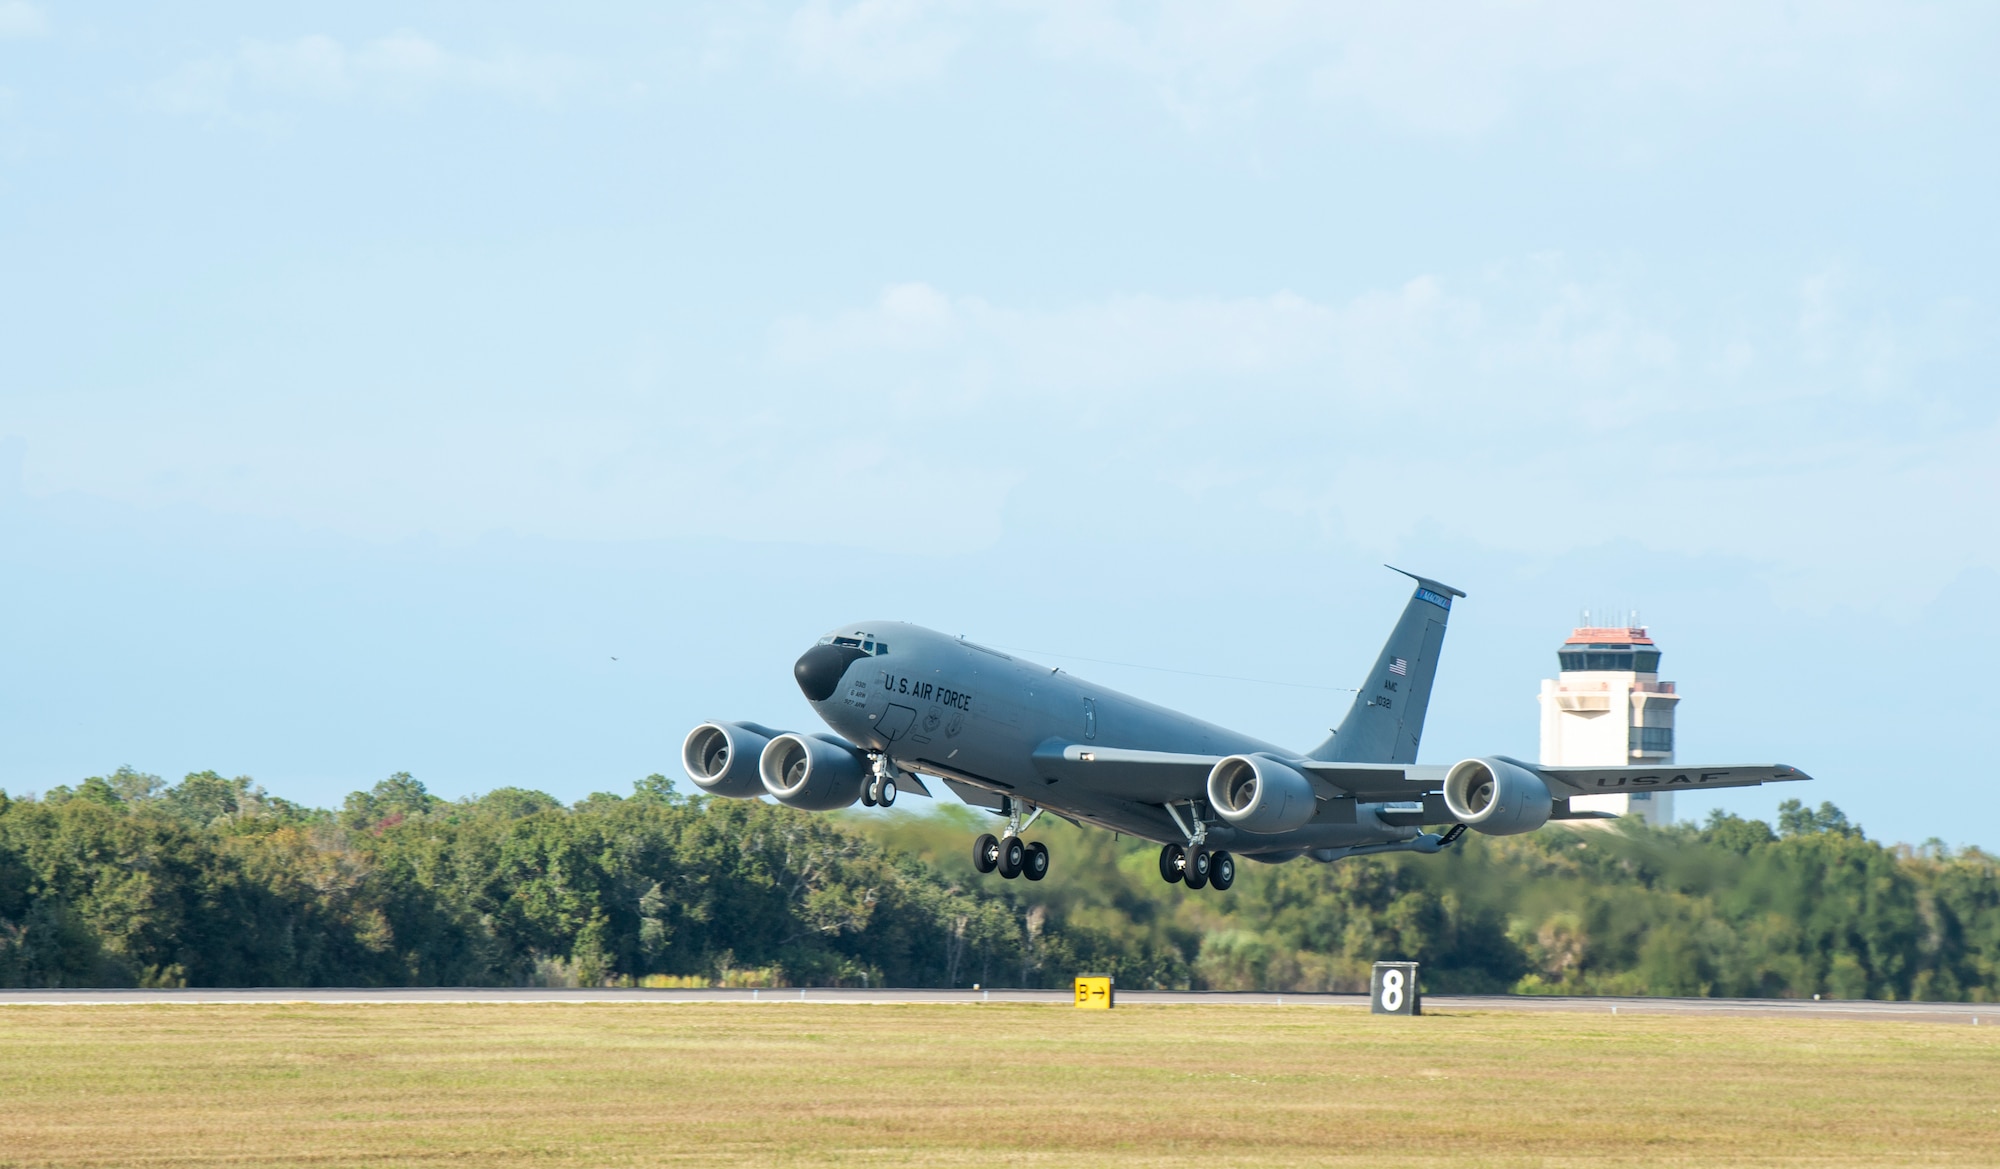 A KC-135 Stratotanker aircraft assigned to the 50th Air Refueling Squadron takes-off from MacDill Air Force Base, Florida, Dec. 8, 2021.